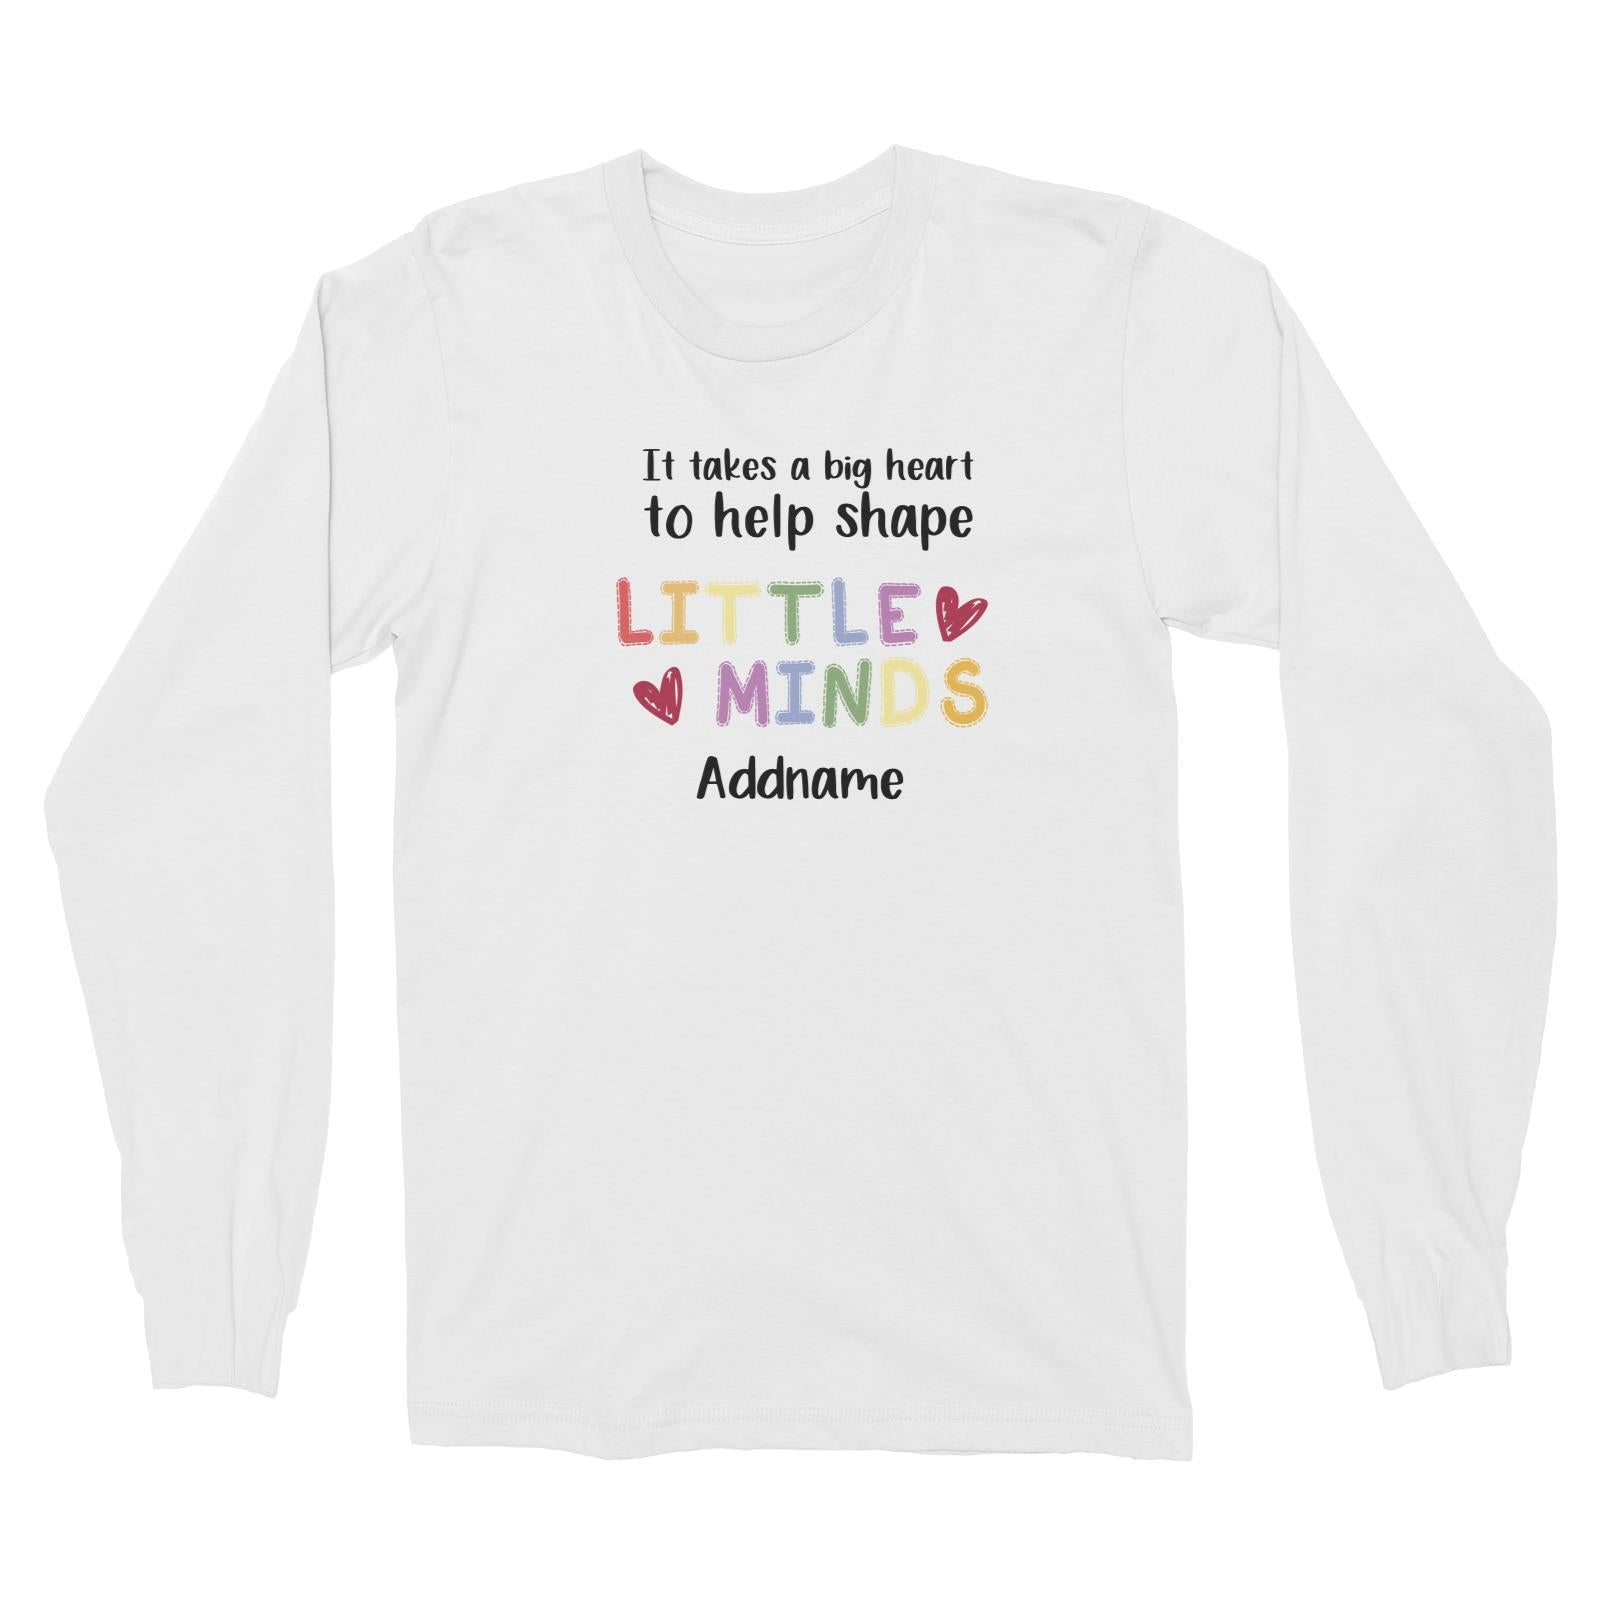 Teacher Quotes 2 It Takes A Big Heart To Help Shape Little Minds Addname Long Sleeve Unisex T-Shirt